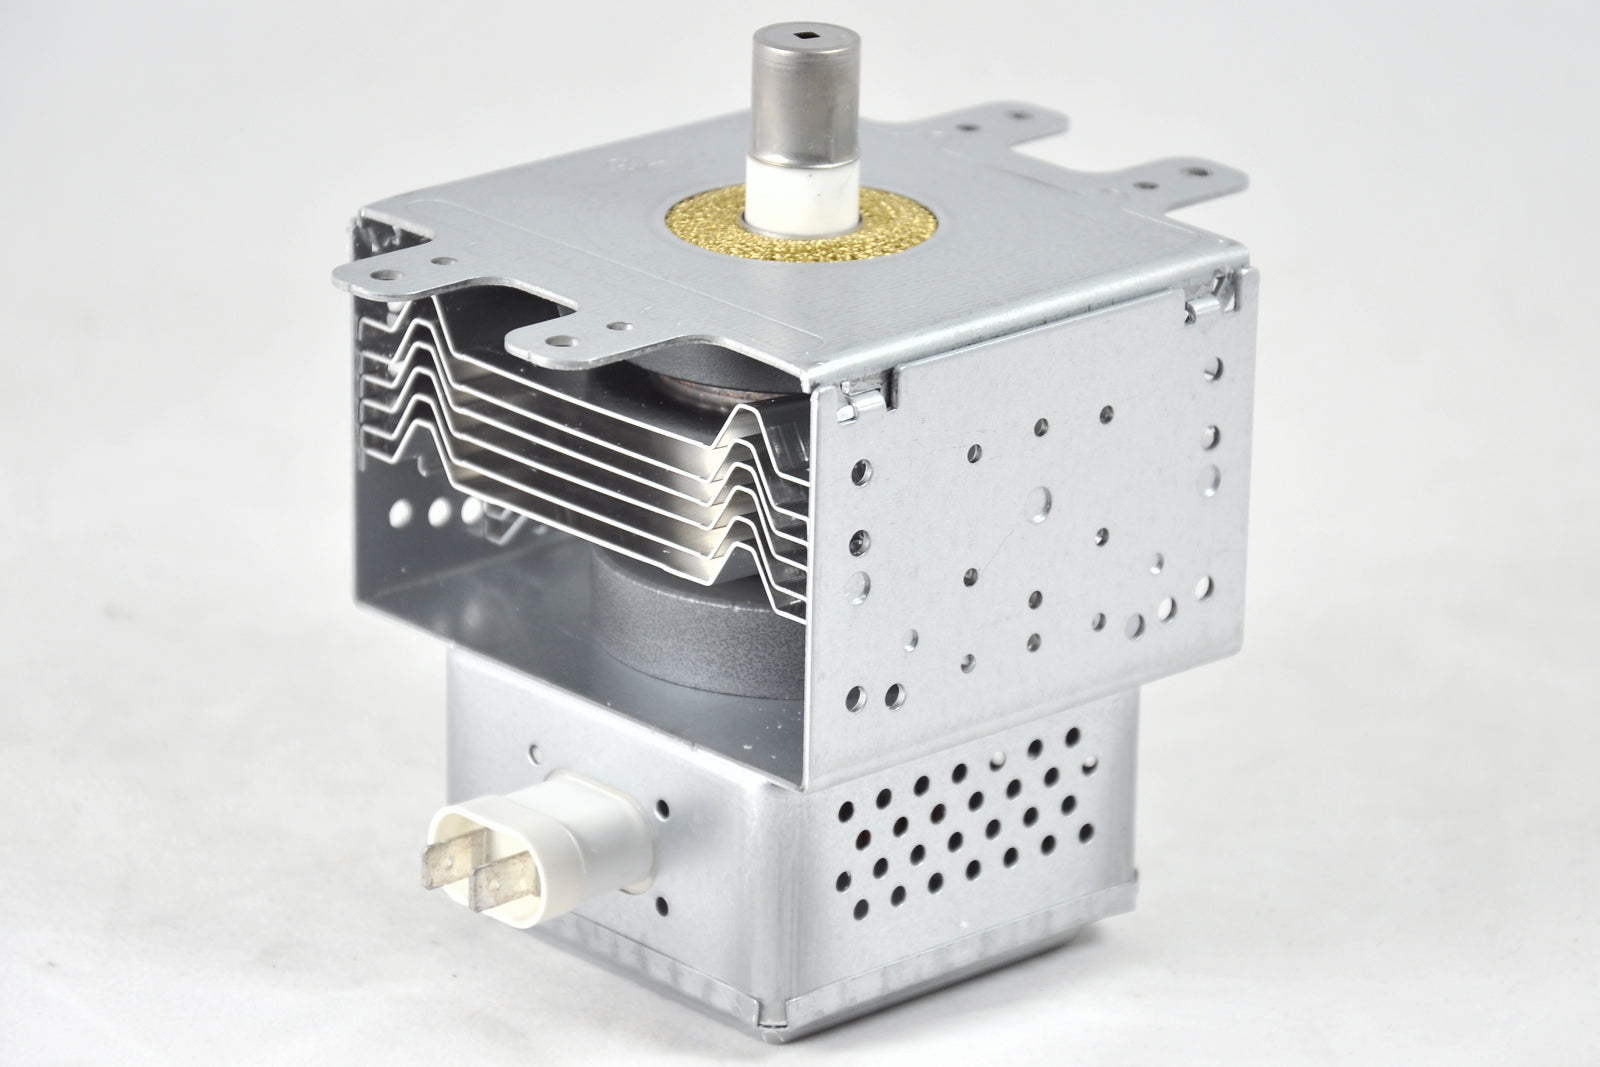 2M236-M42E2 Magnetron for microwave ovens